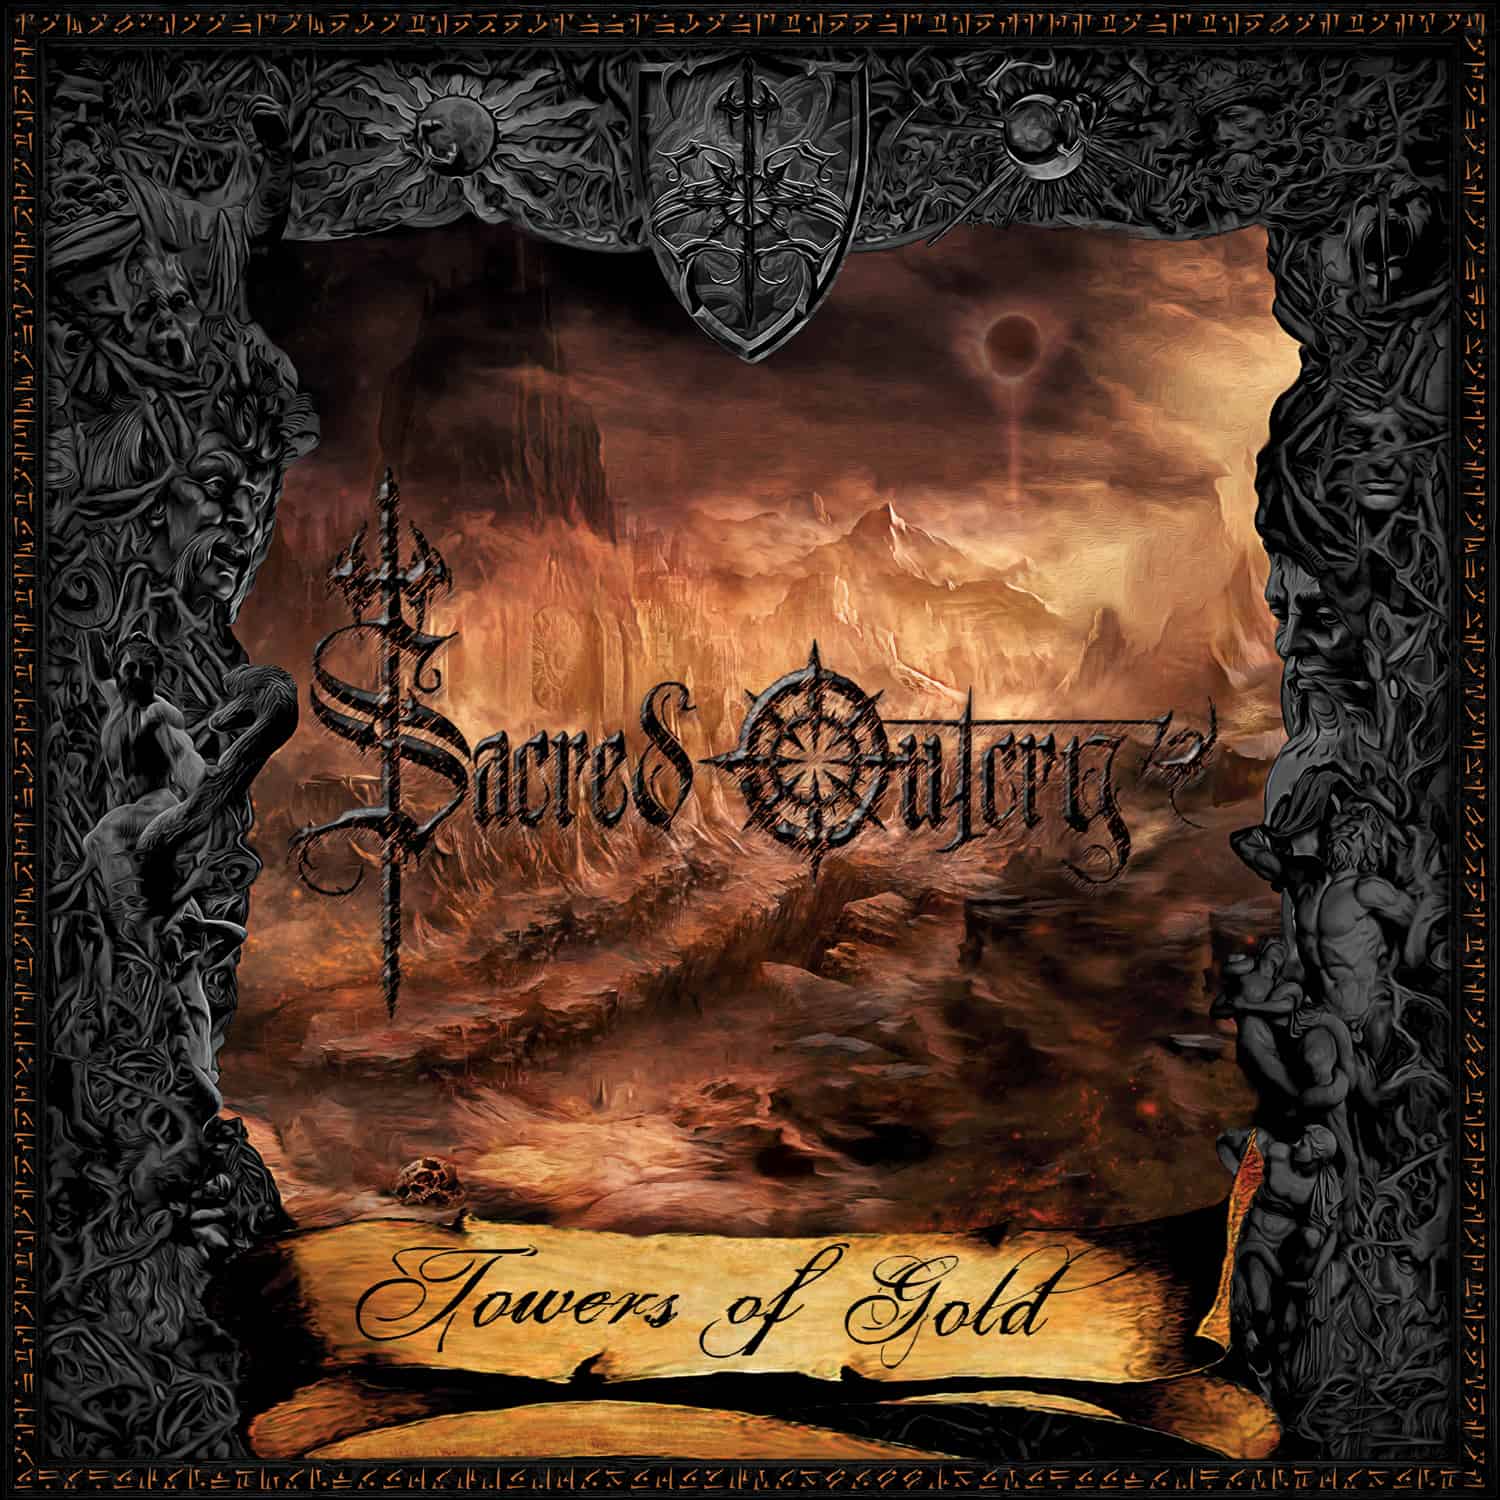 Sacred Outcry – Towers of Gold Review